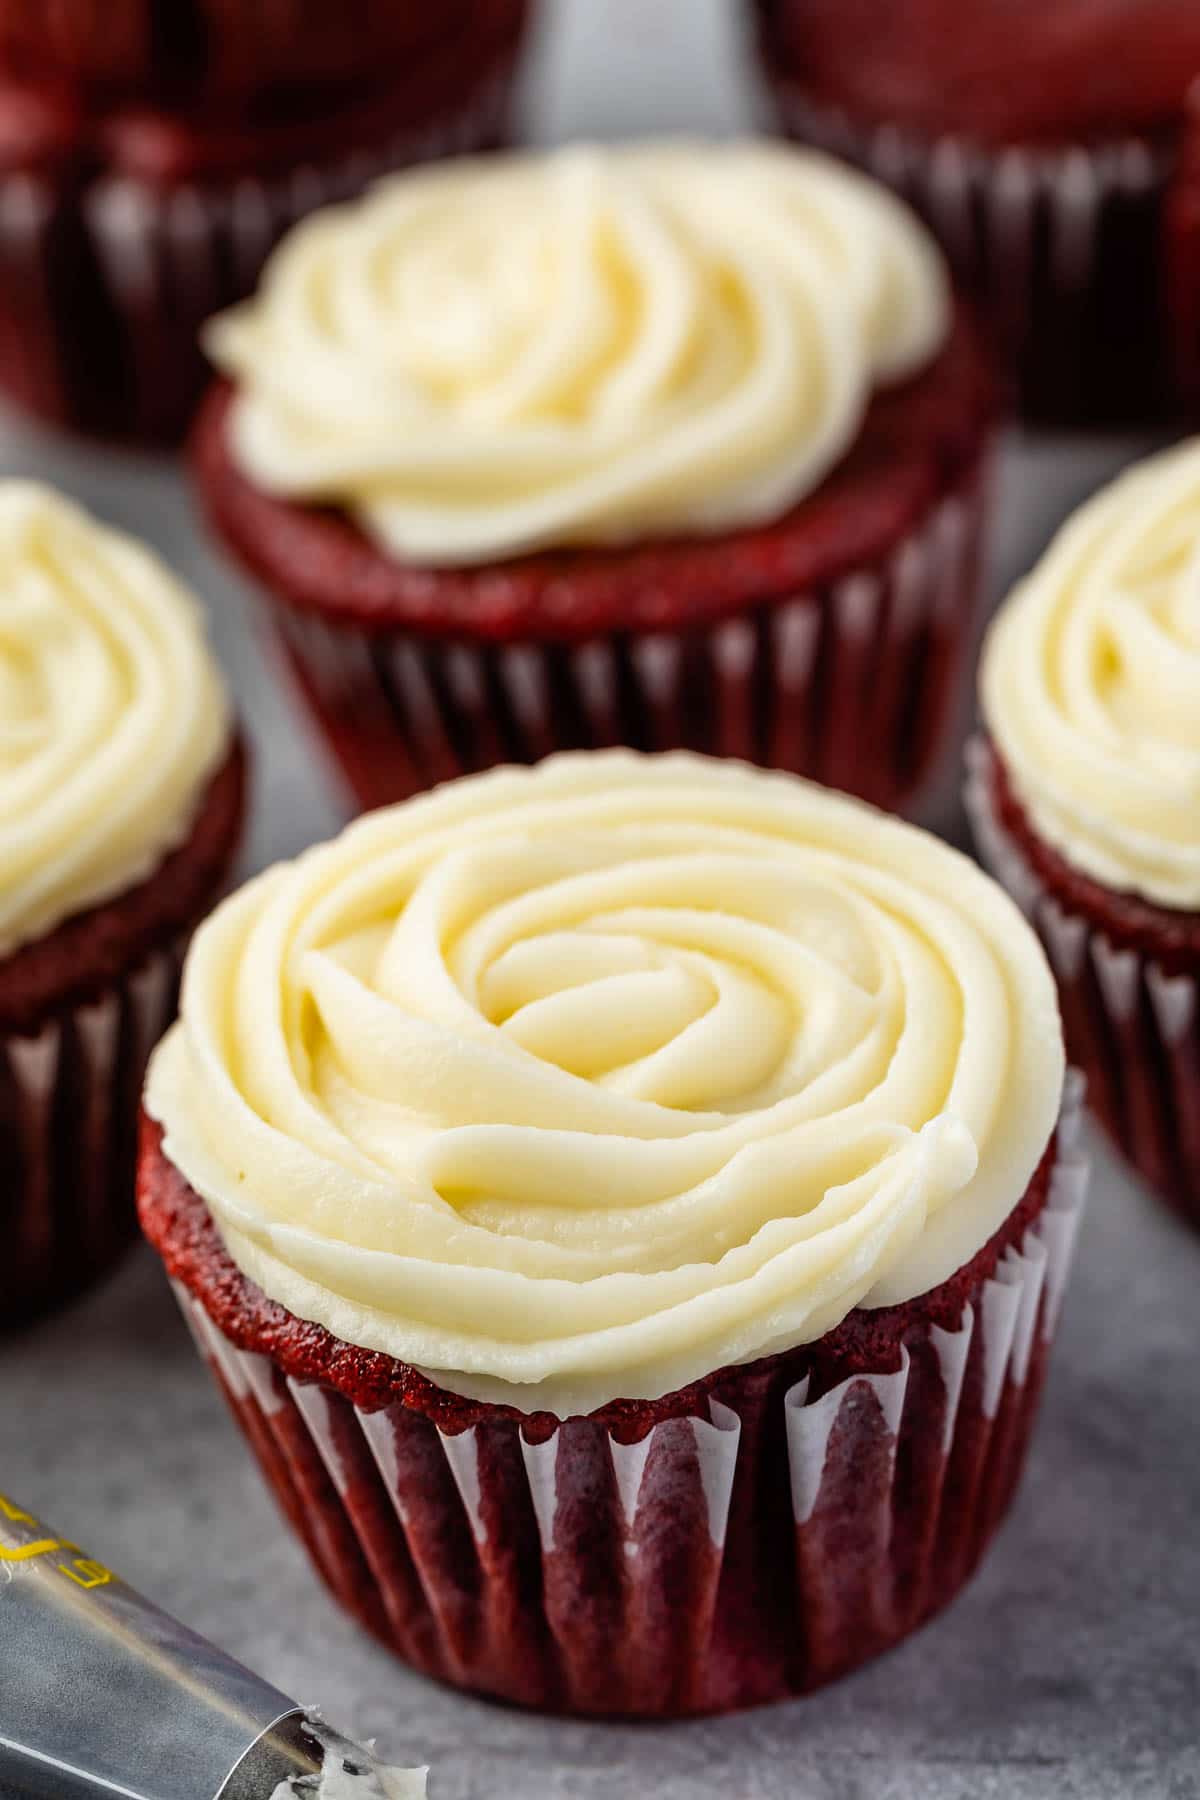 Red velvet cupcakes with cream cheese frosting on top